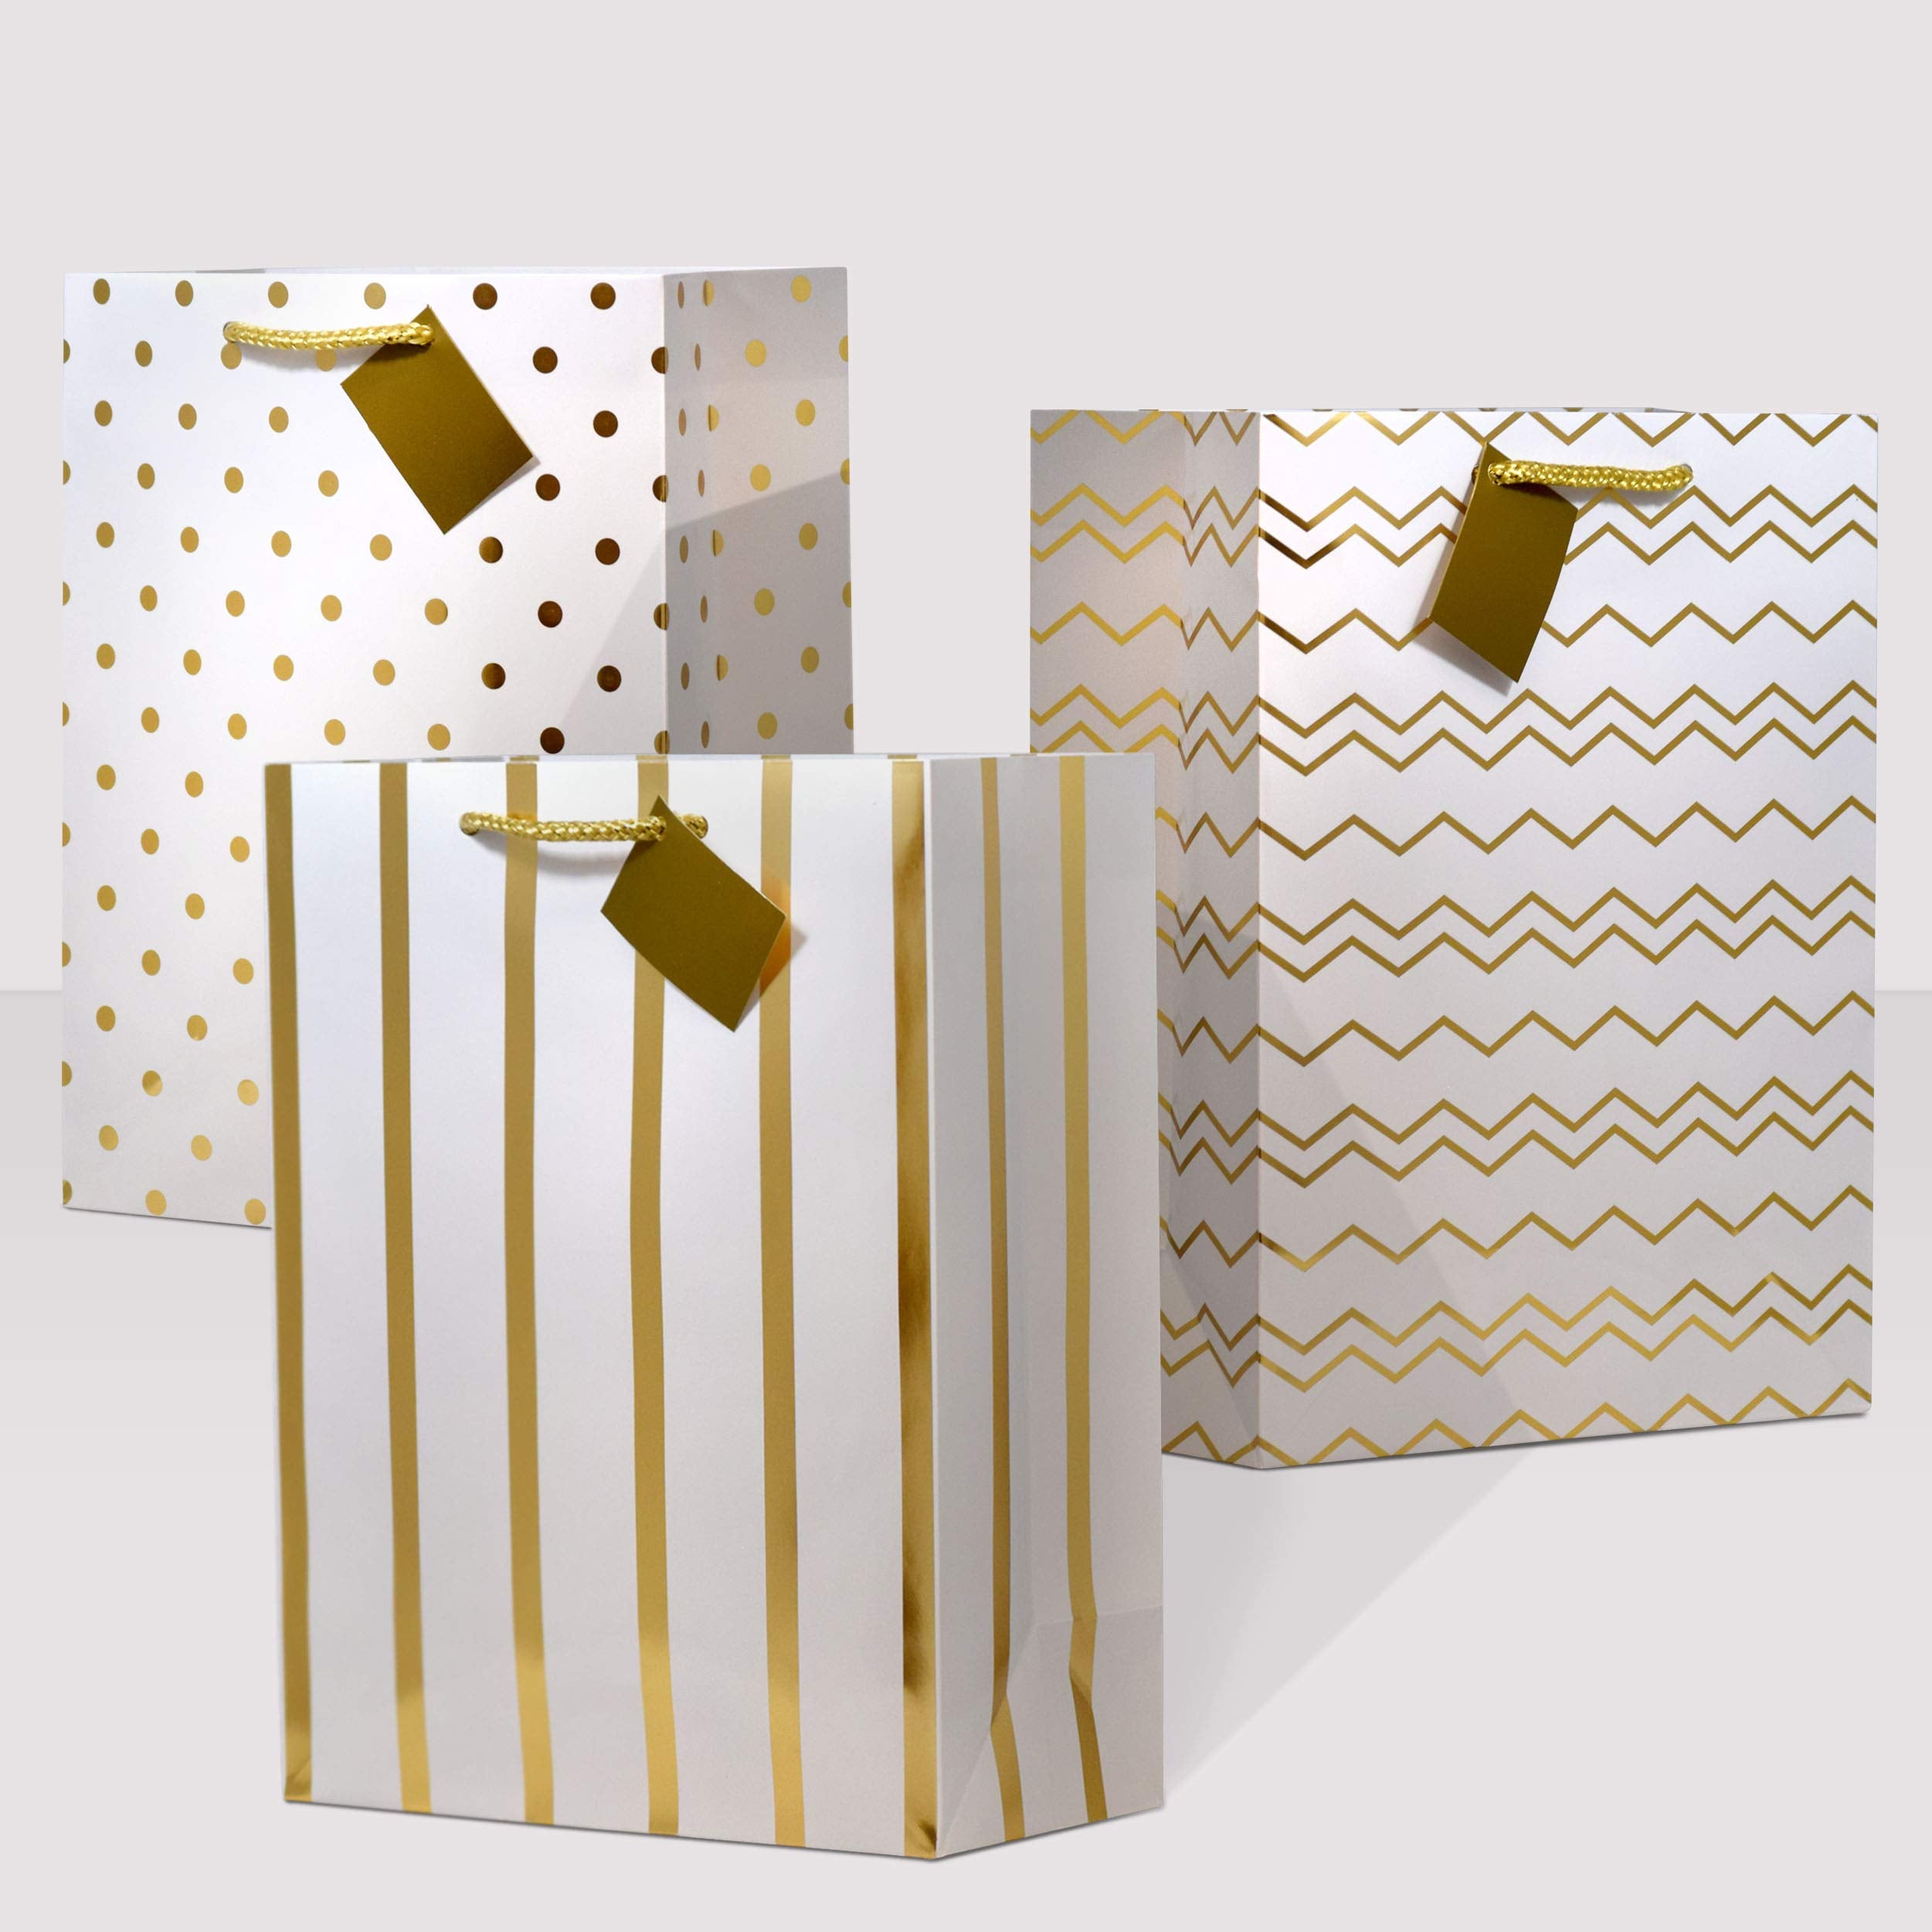 OccasionALL Gold, Rose Gold, Silver Assorted Print Gift Bags  - Very Good